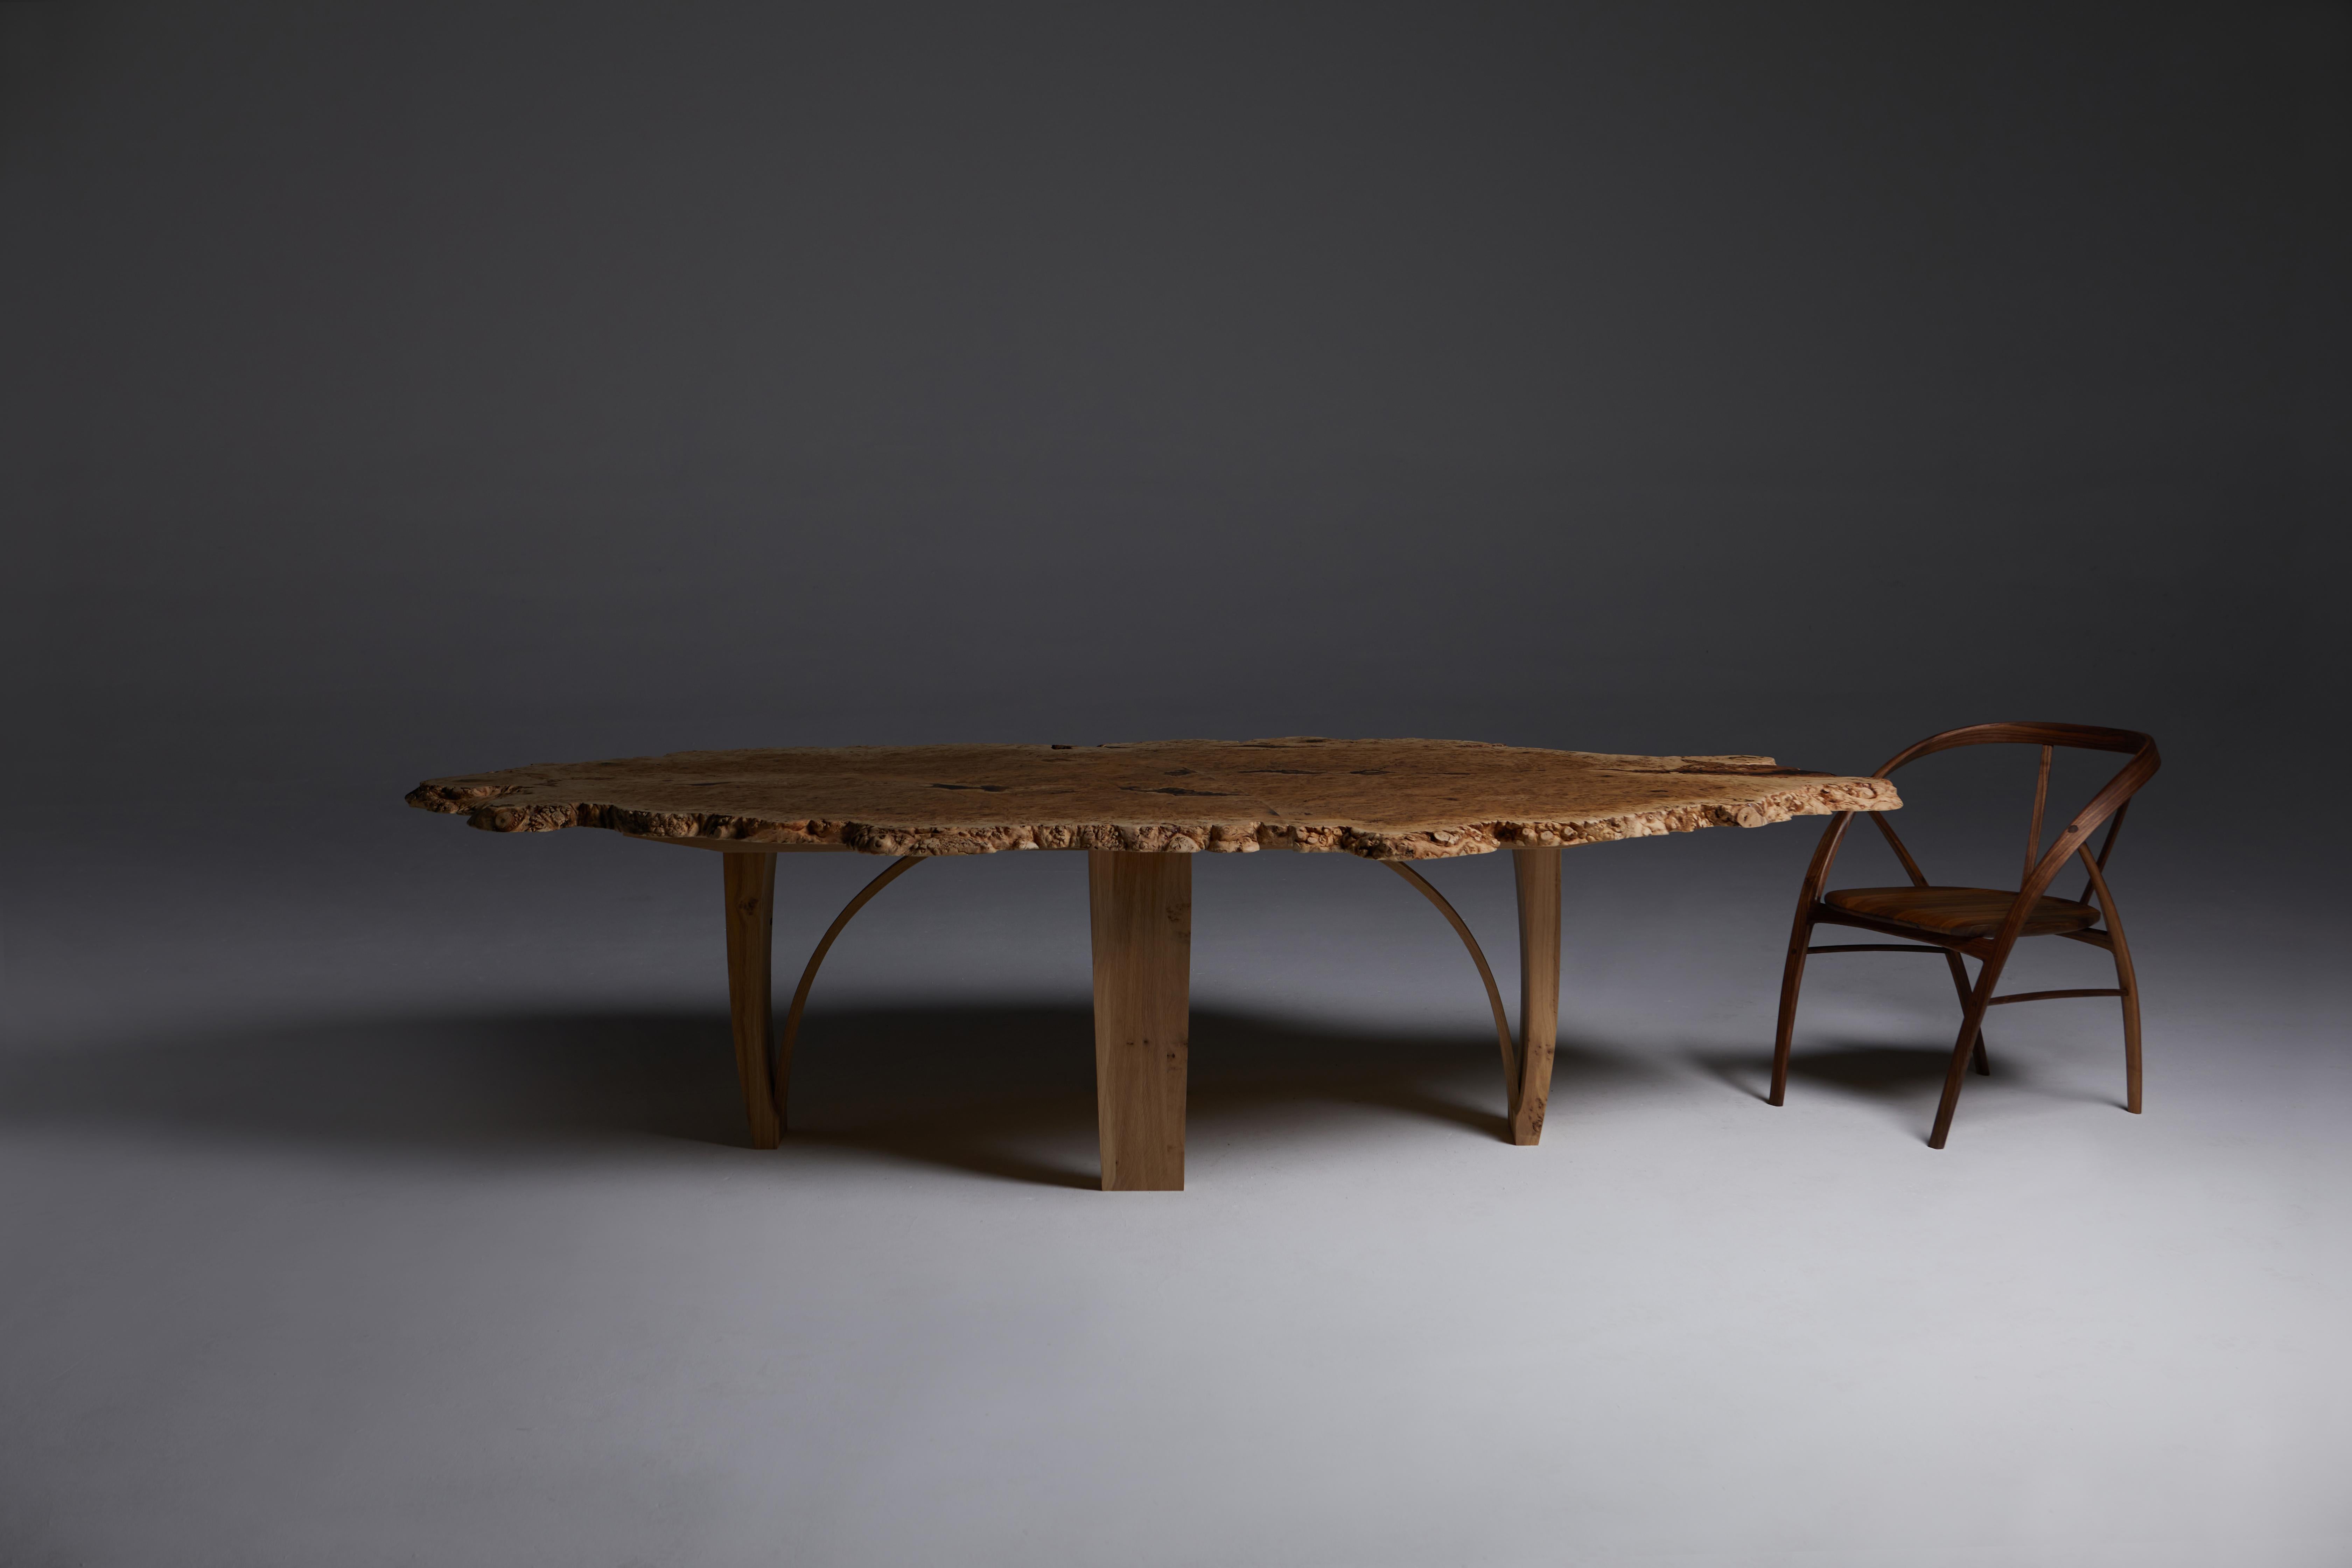 Oval dining table, English Burr Oak with Chapel legs: 

For this table, I first sauce the perfect slabs for the tabletop which can take some time to find, the main thing is that you are not in a hurry,  this will be a one-of-a-kind unique project.